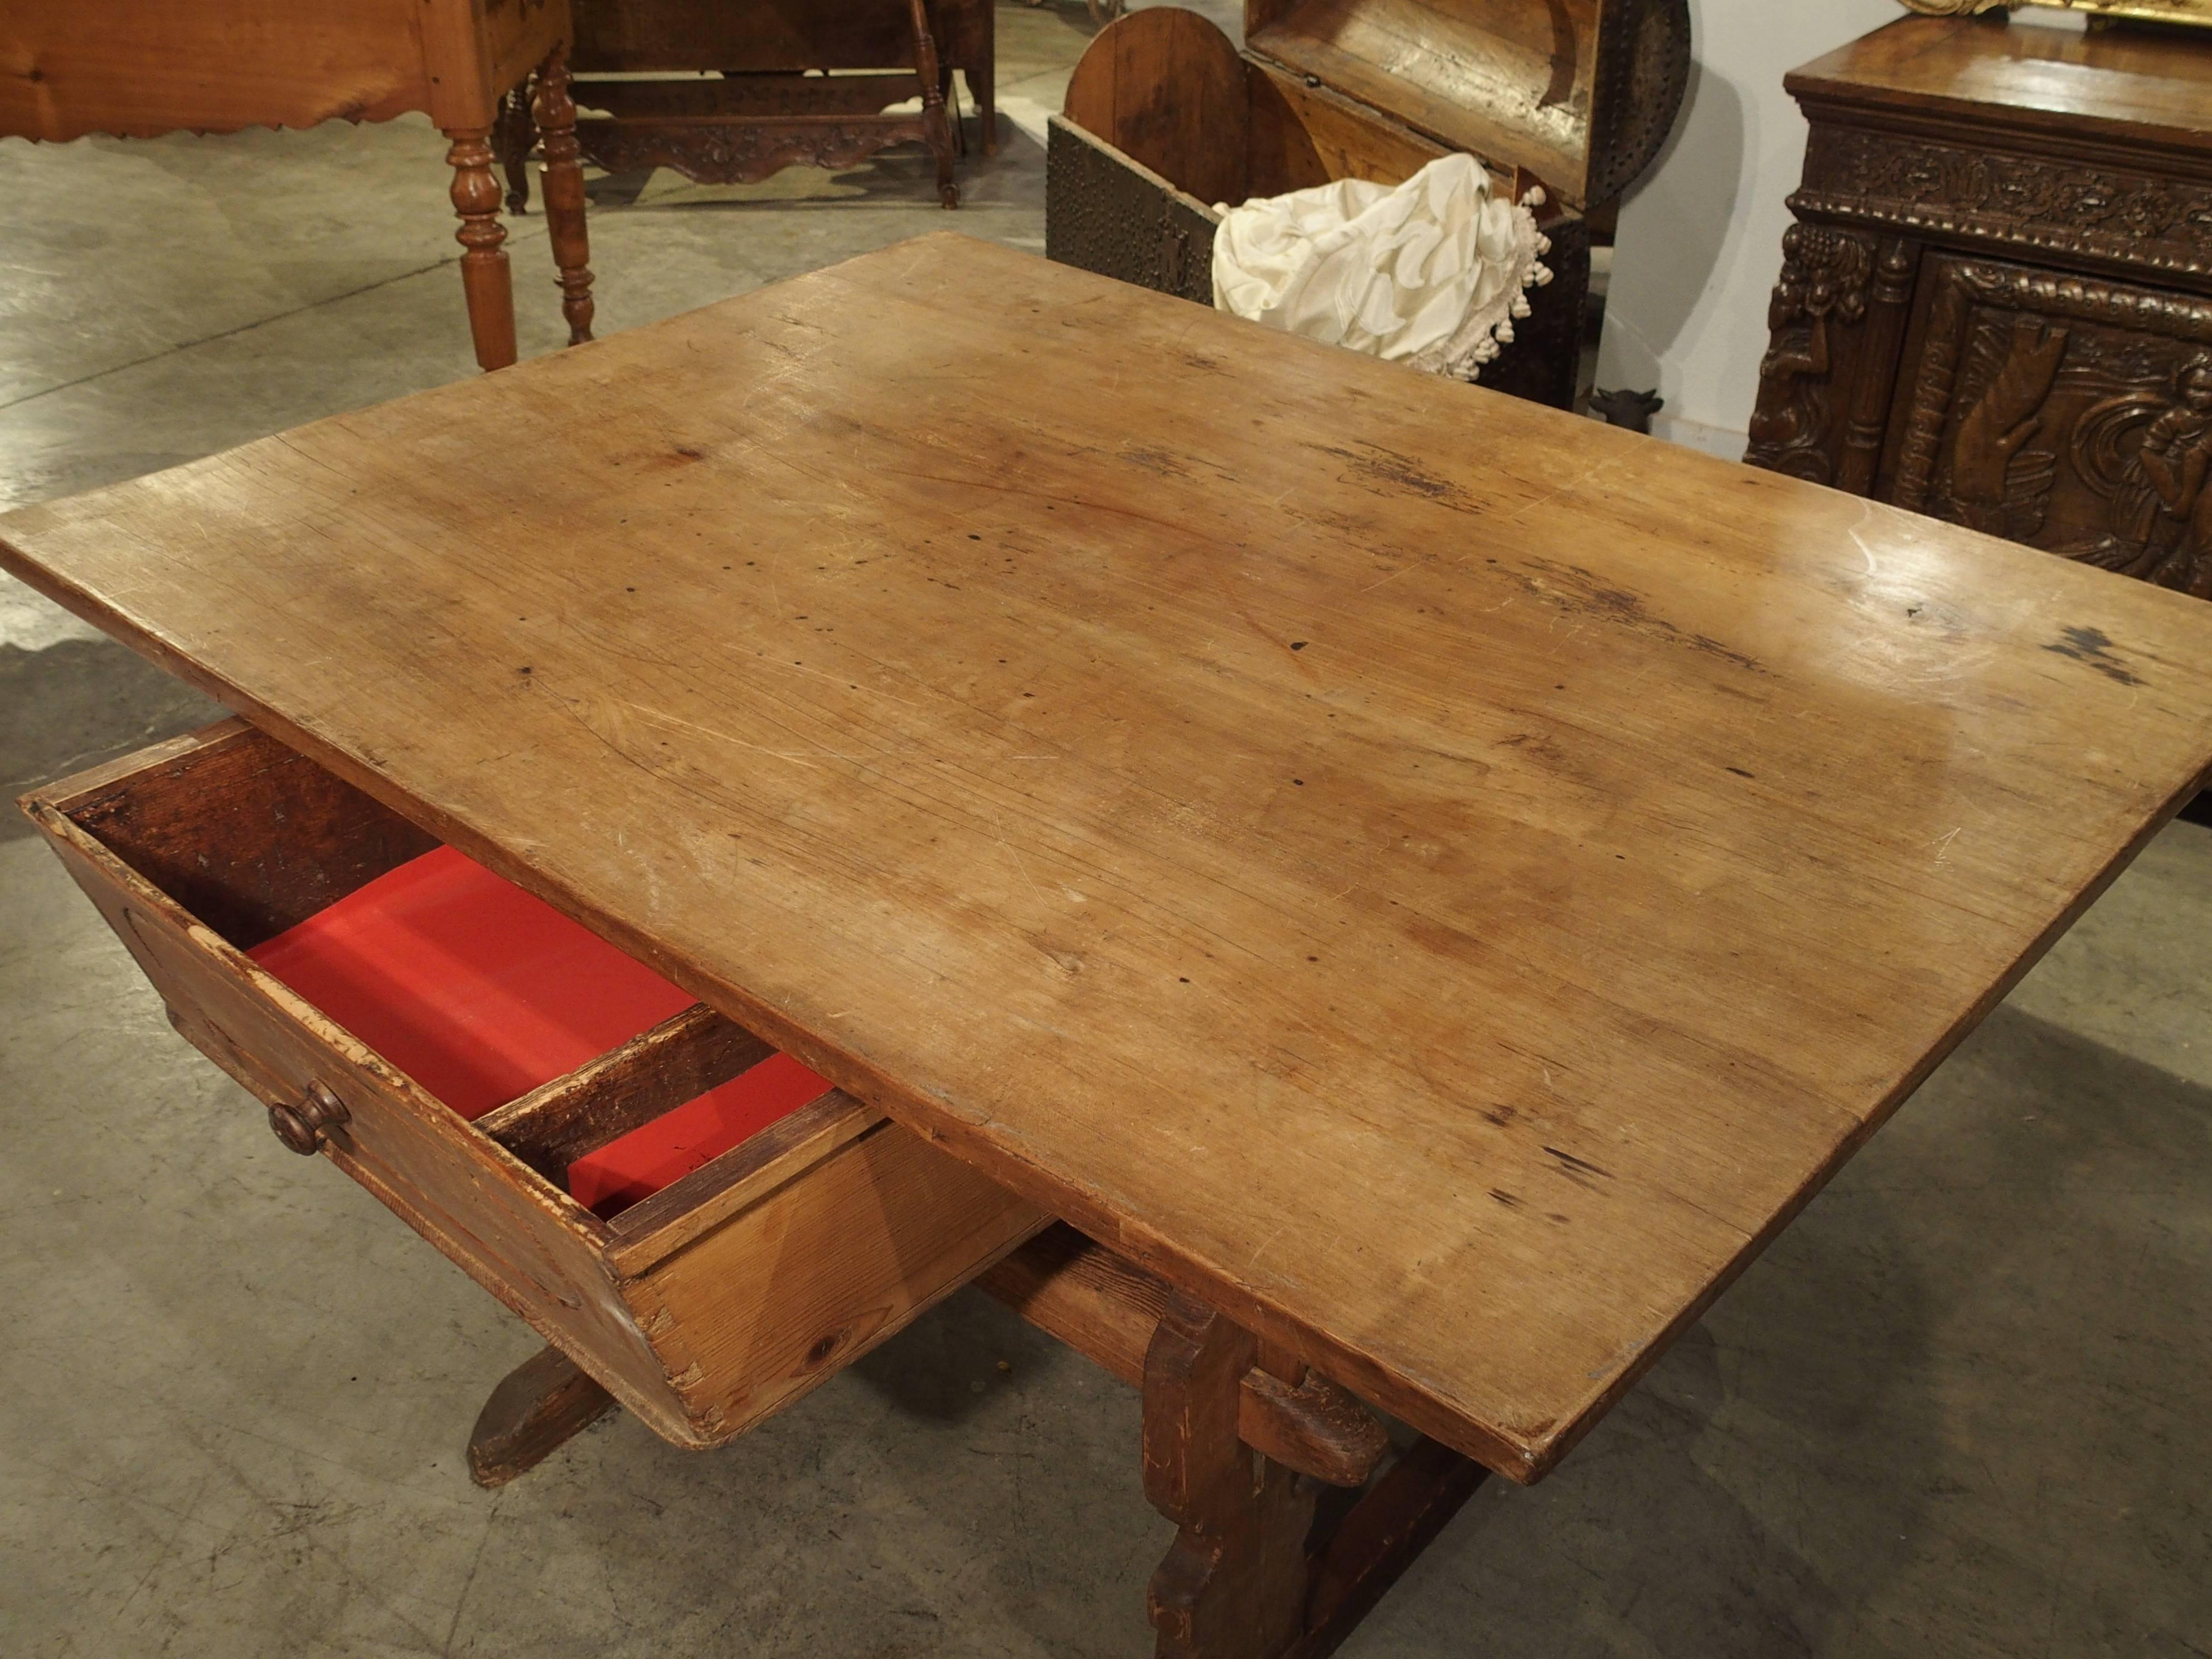 This quaint mountain table is of Savoie or Swiss origin and is made from softwood pine and fruitwood. Its top is sizeable at 31 x 51 while its base is smaller. This allows for leg room and more seating at the table. The apron has a drawer for